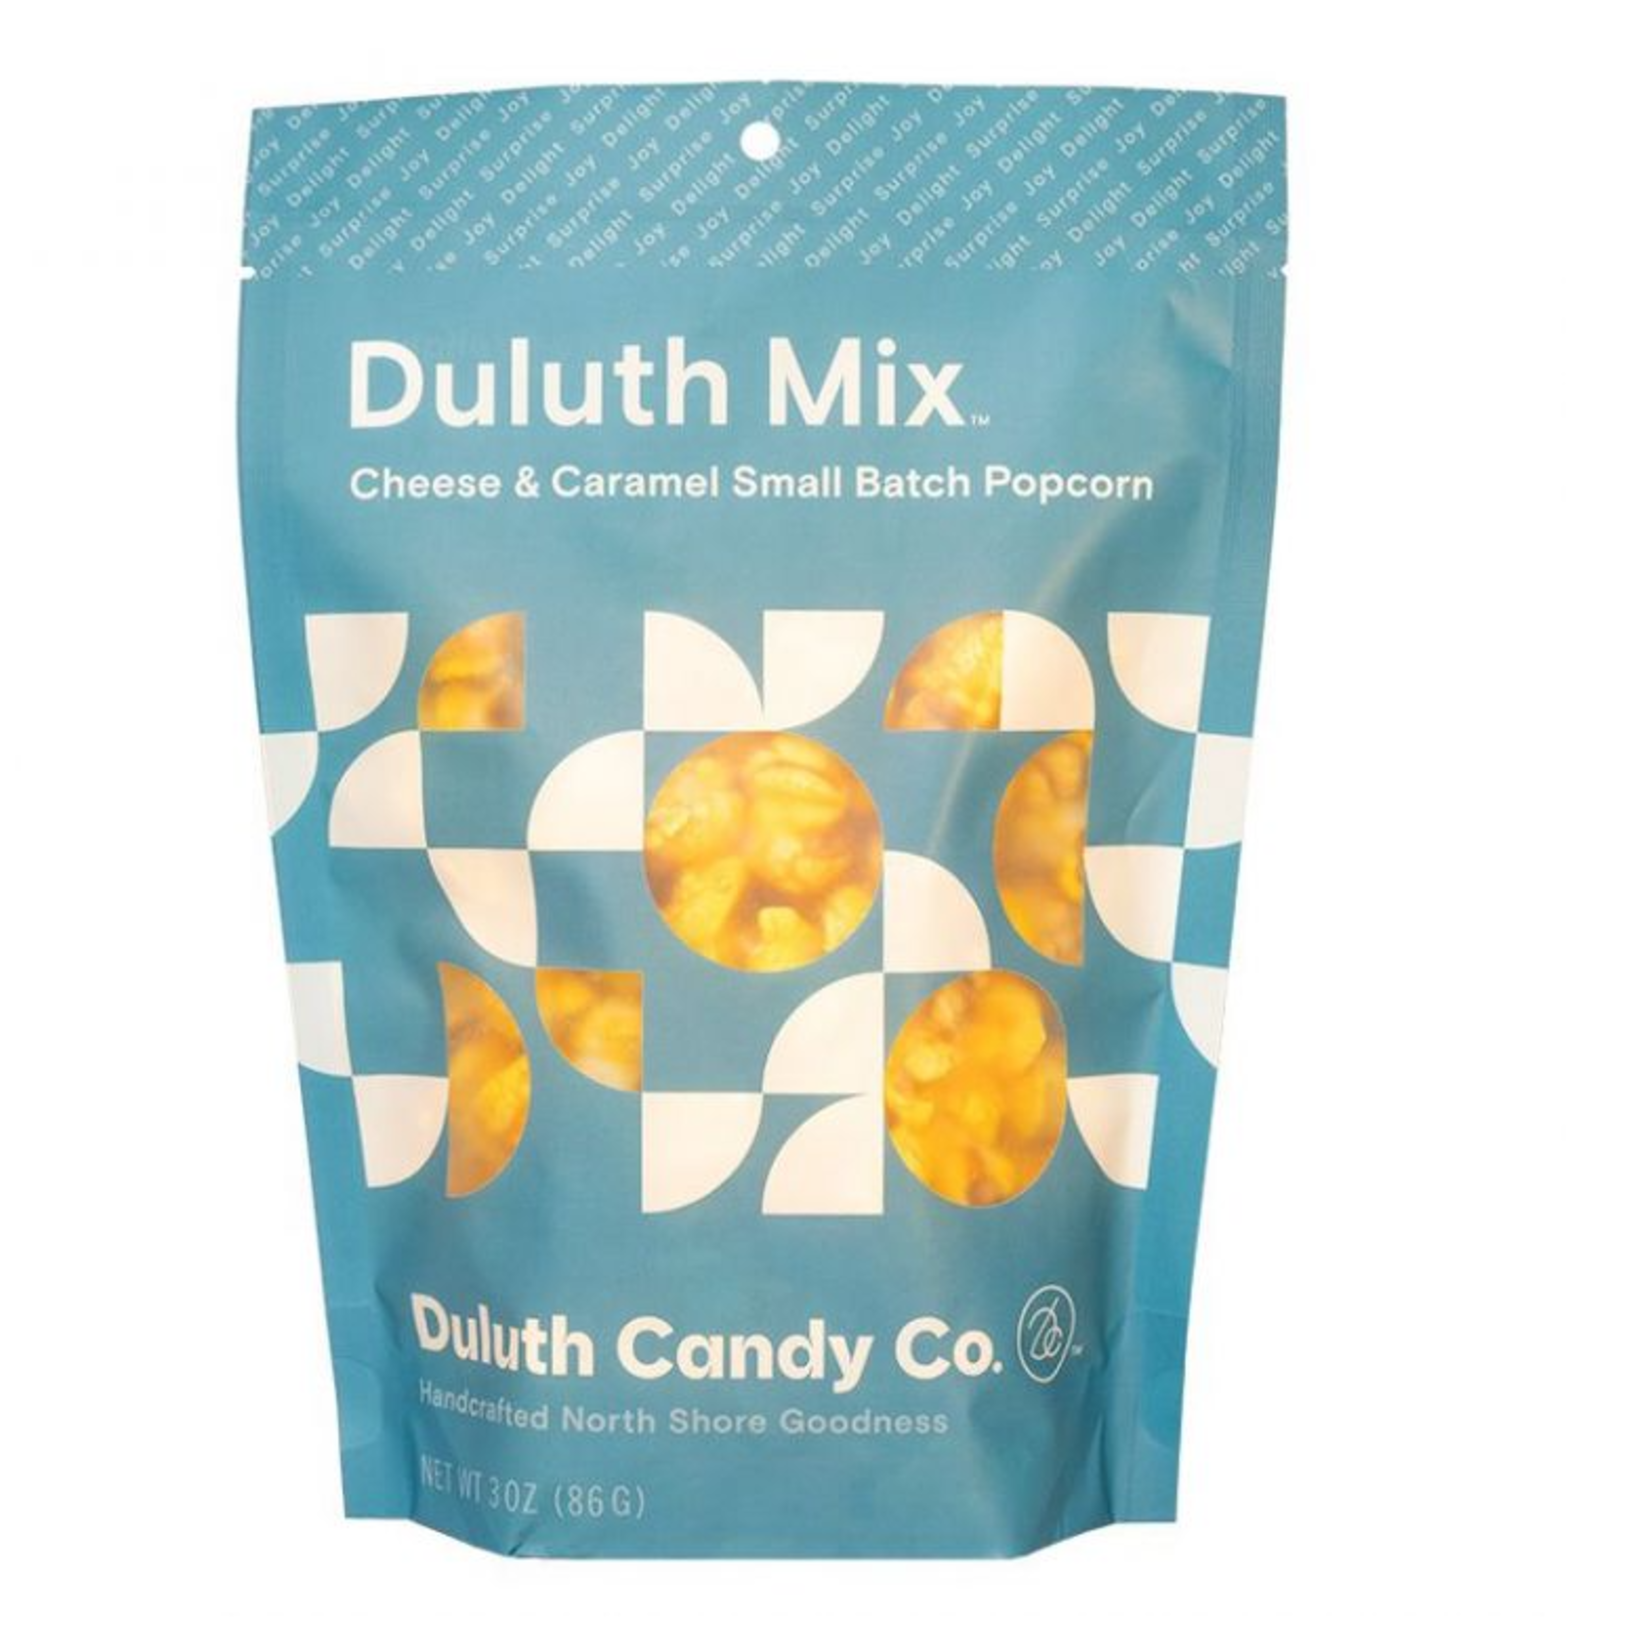 Duluth Candy Co. Duluth Mix - 5 Oz. - Duluth Candy Co